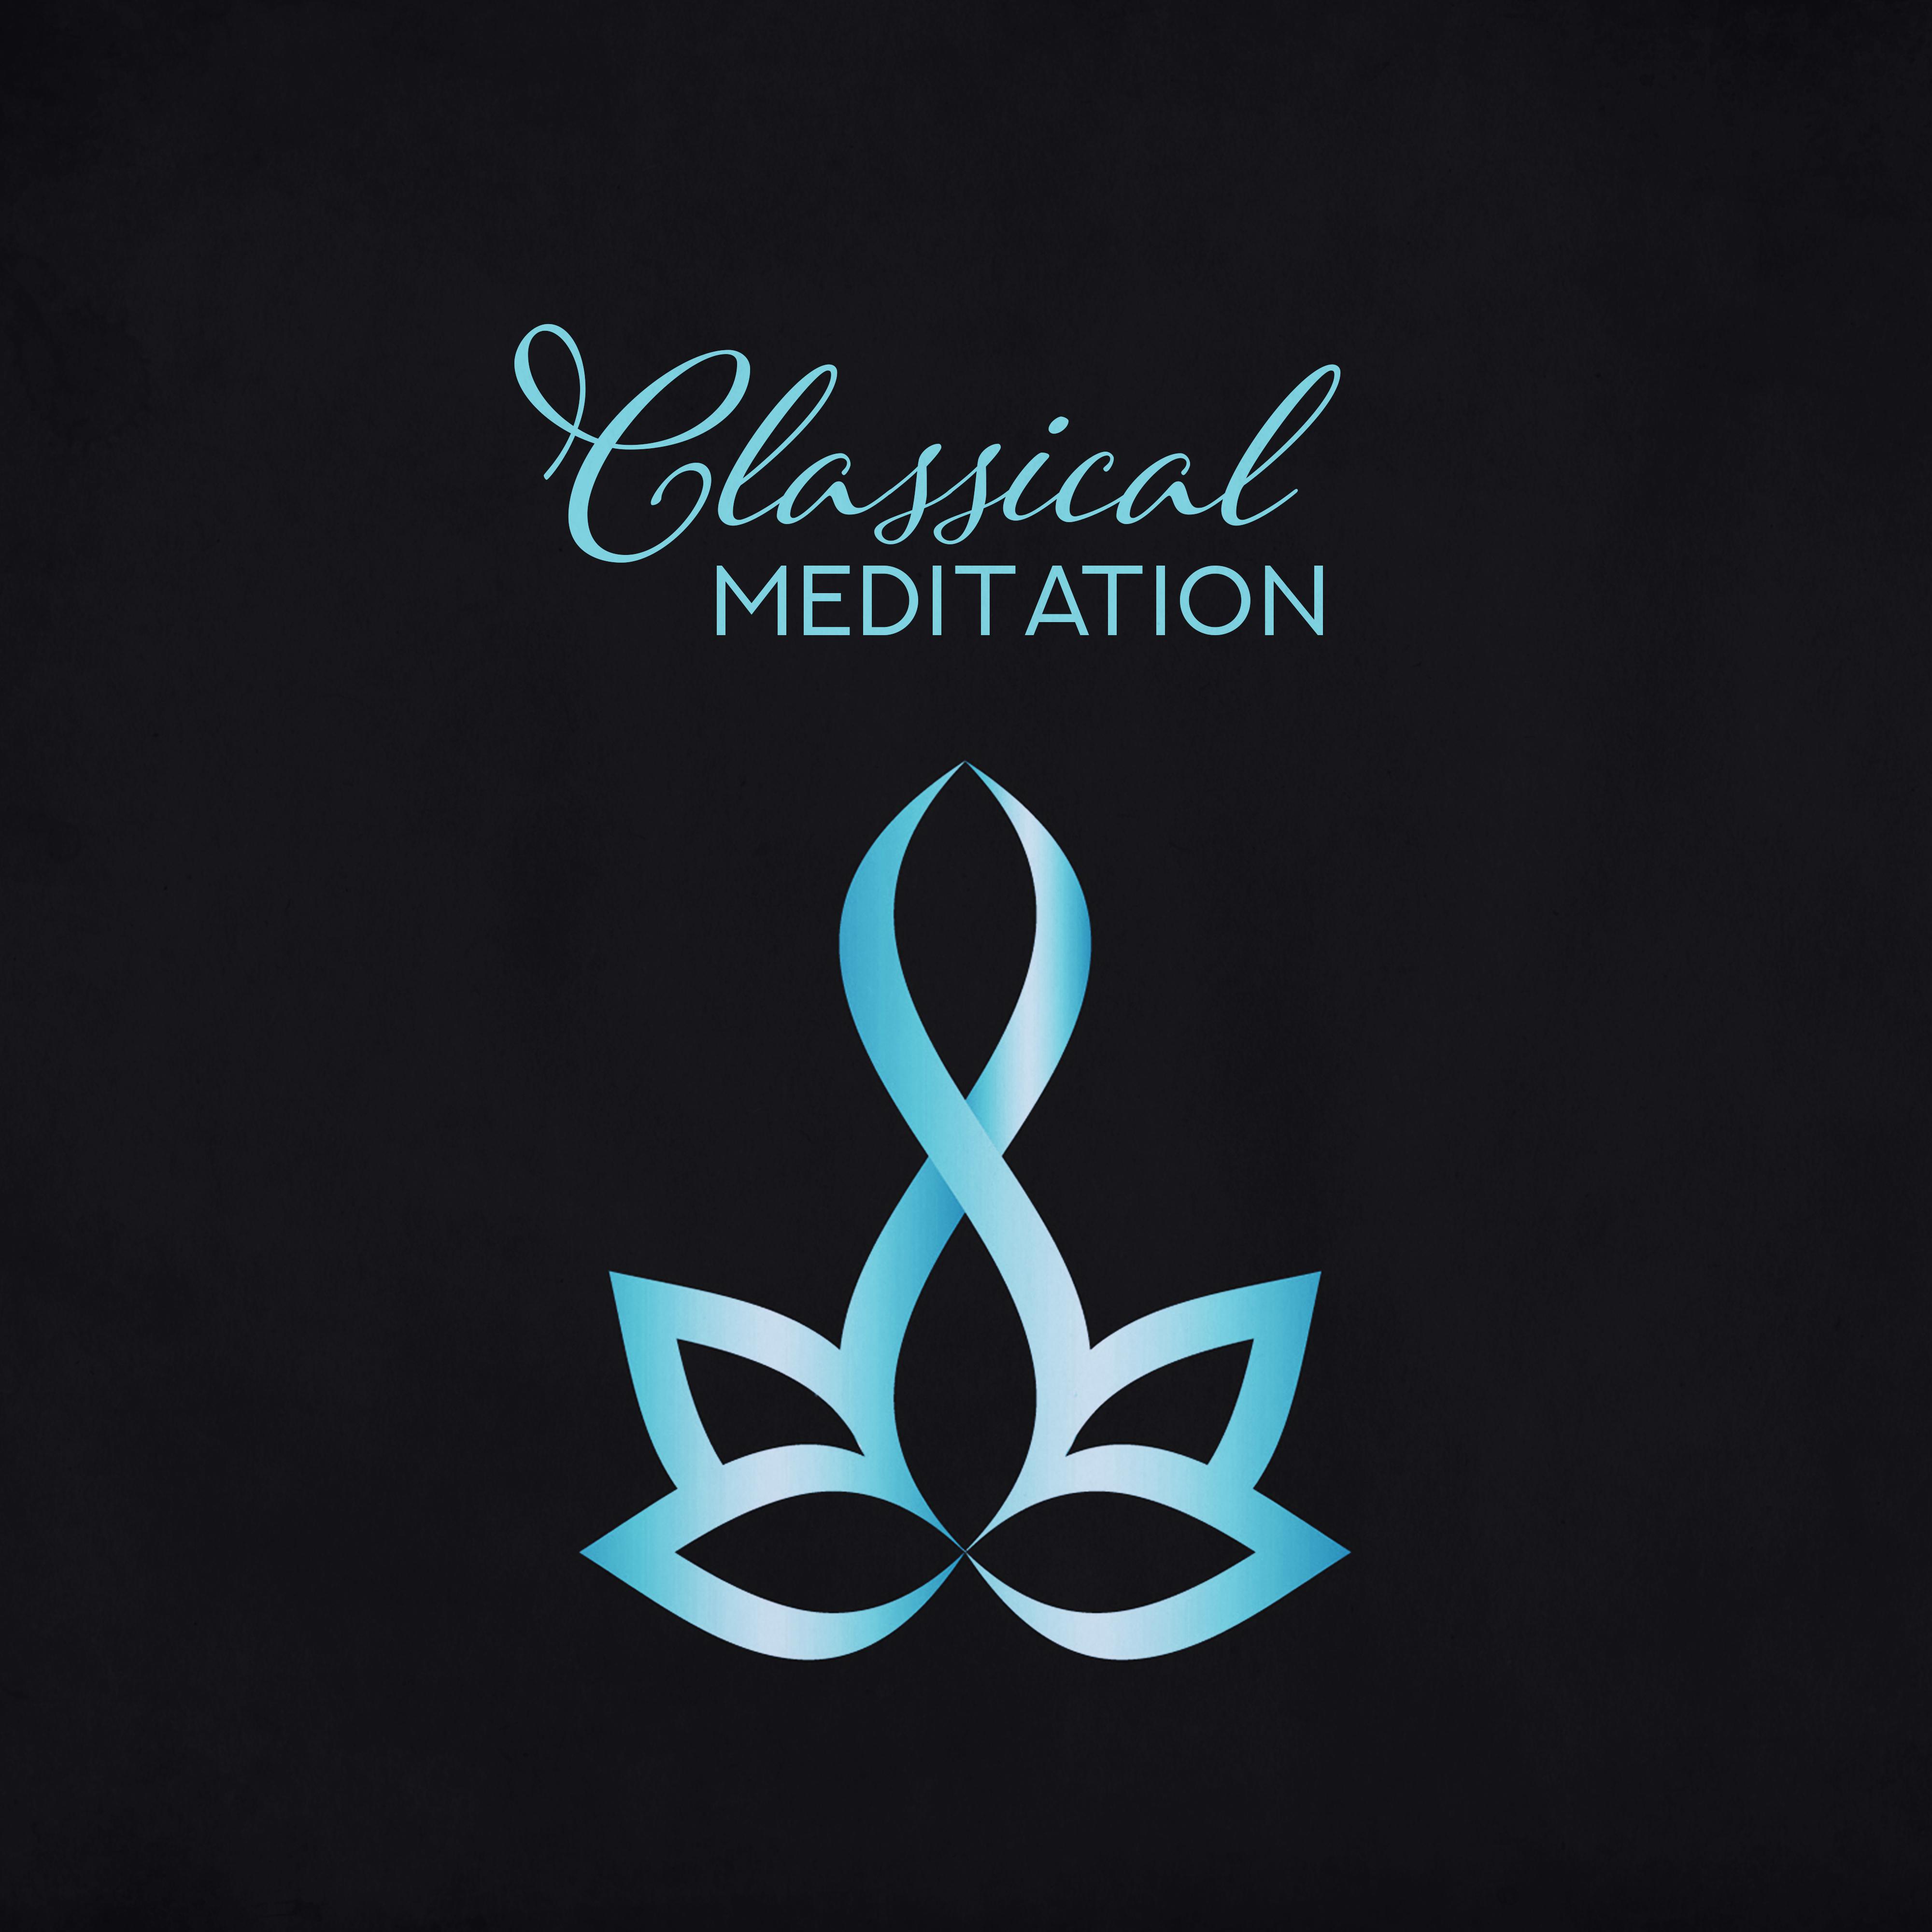 Classical Meditation  Gentle Meditation Music, Peaceful Melodies for Relaxation, Ambient Yoga, Harmony Meditation Melodies